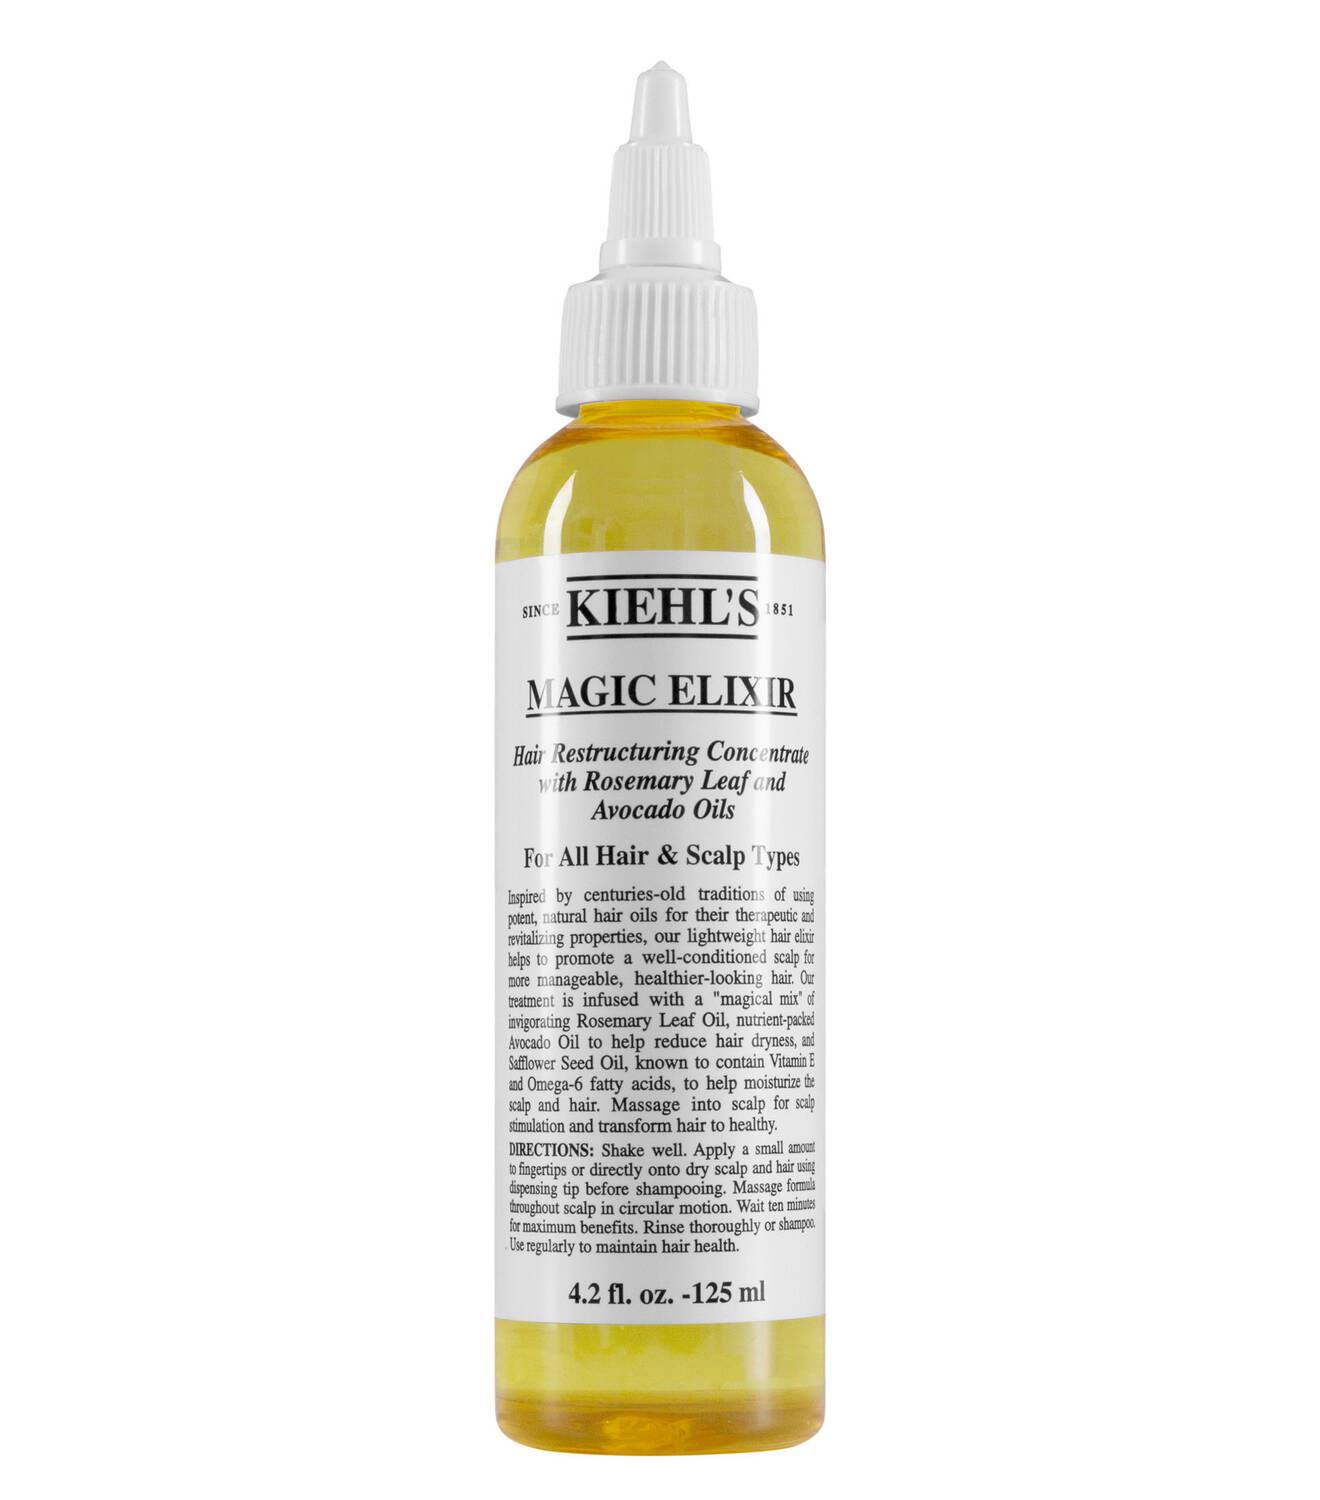 Magic Elixir Hair Restructuring Concentrate, Kiehls. Magic Elixir Hair Restructuring Concentrate, de Kiehls